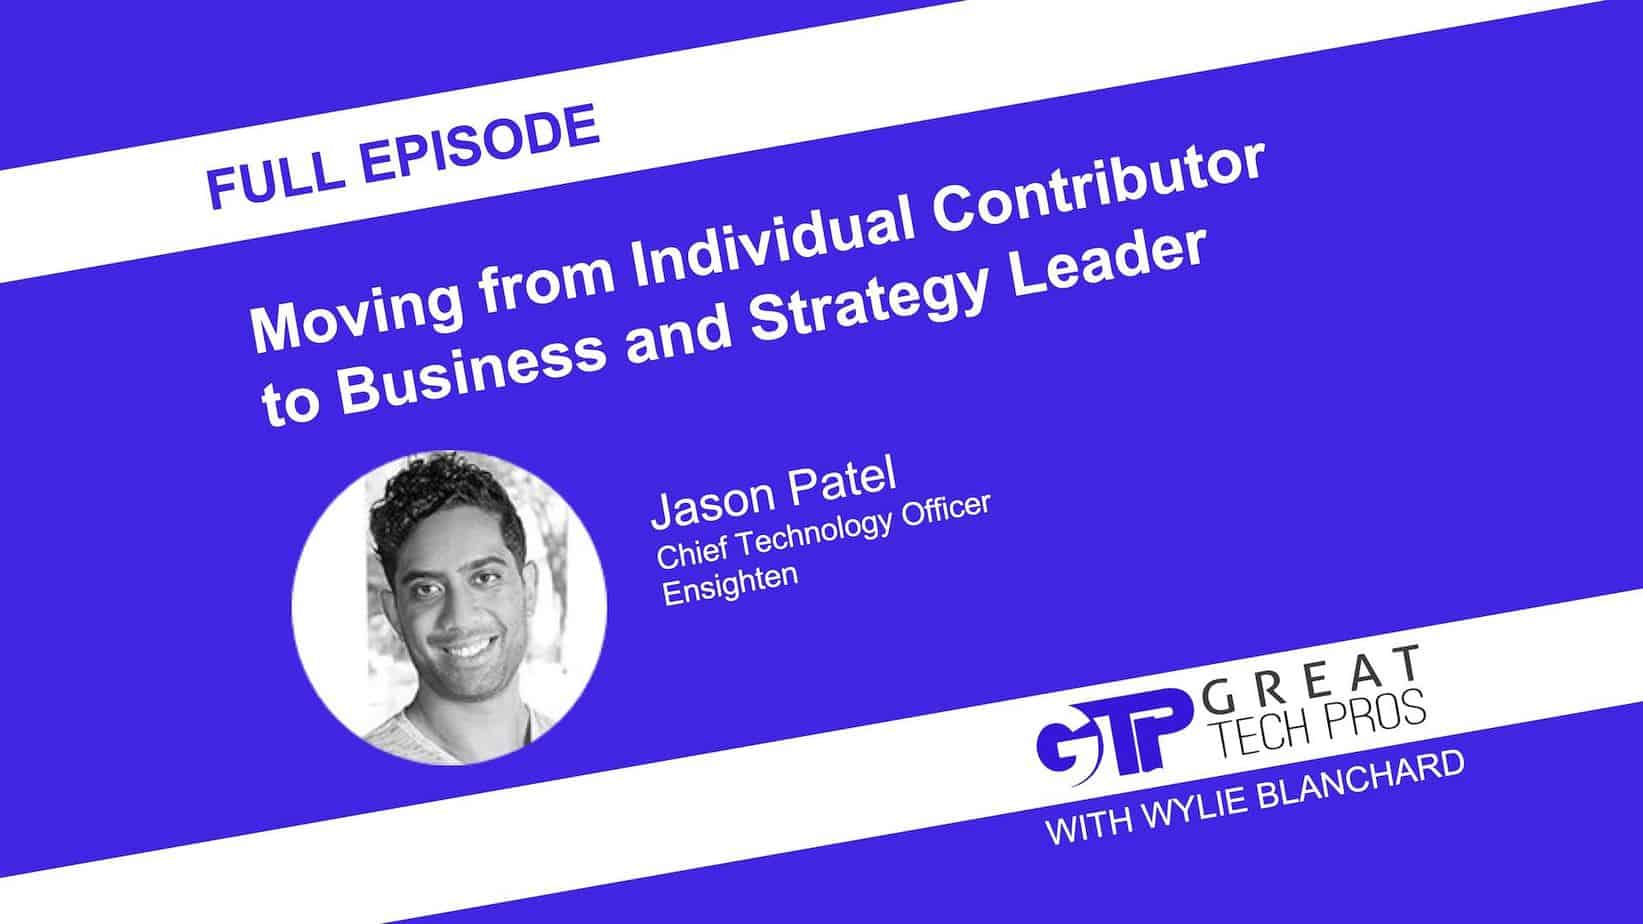 Discussion with Jason Patel: Moving from Individual Contributor to Business and Strategy Leader